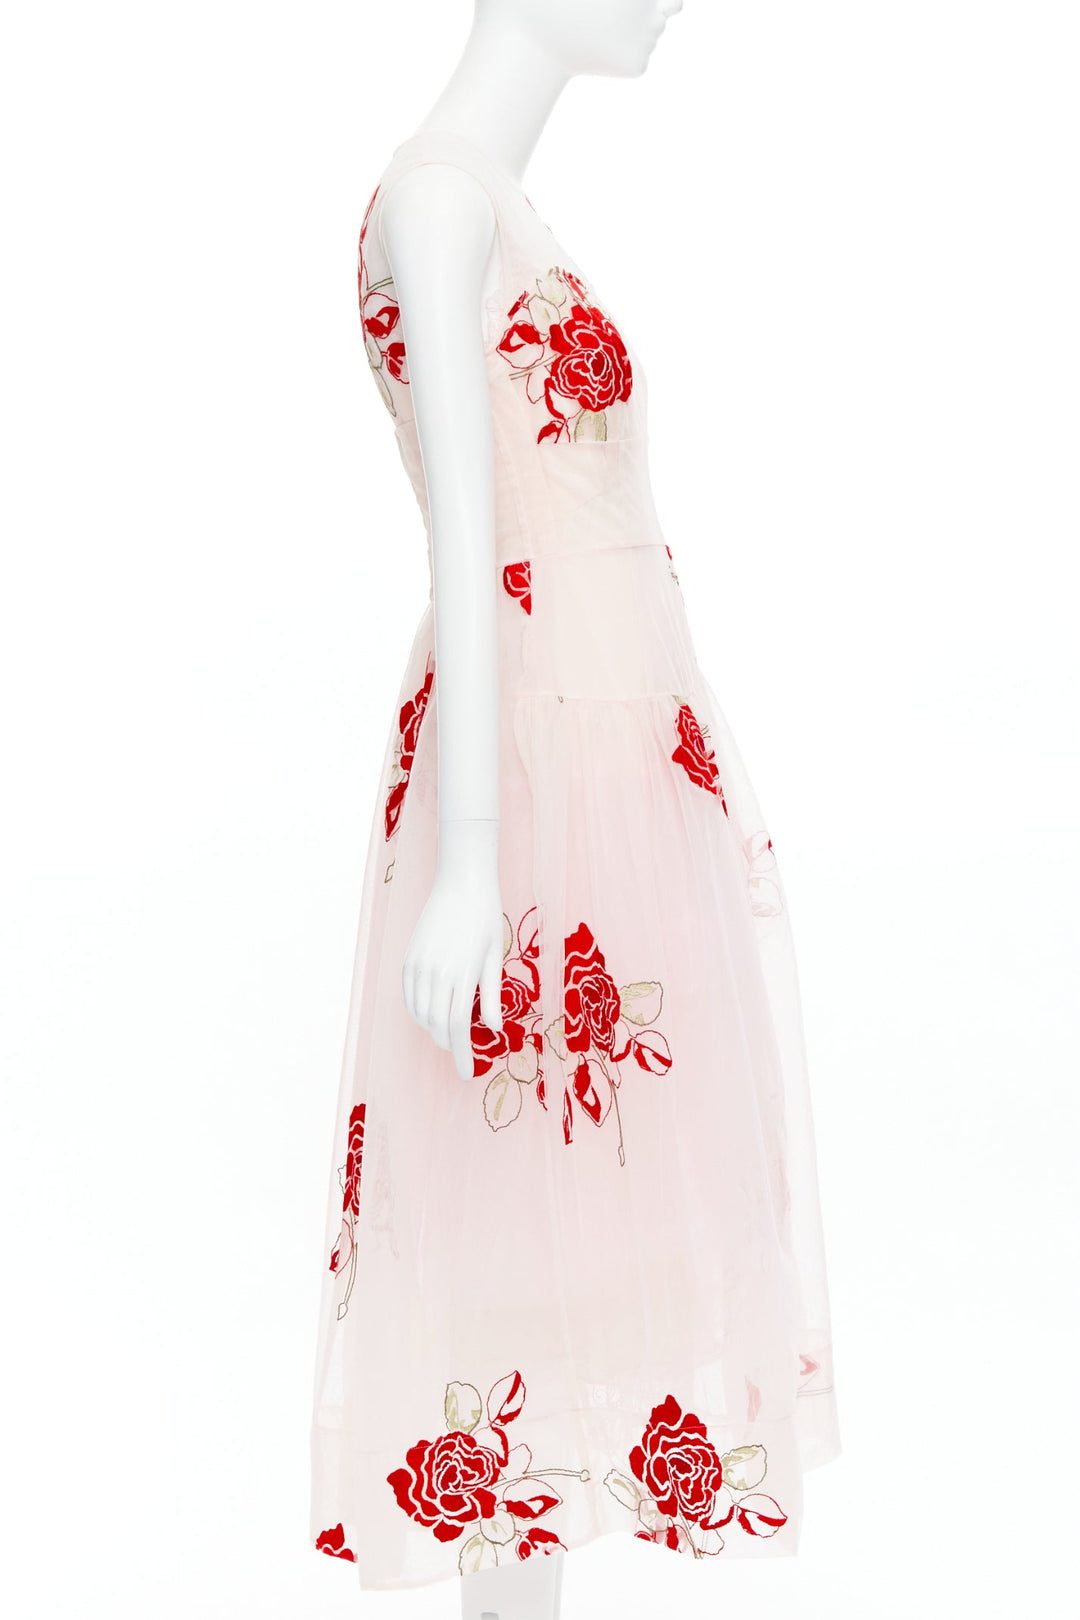 SIMONE ROCHA 2020 Runway  pink red rose floral embroidery tulle dress UK8 S